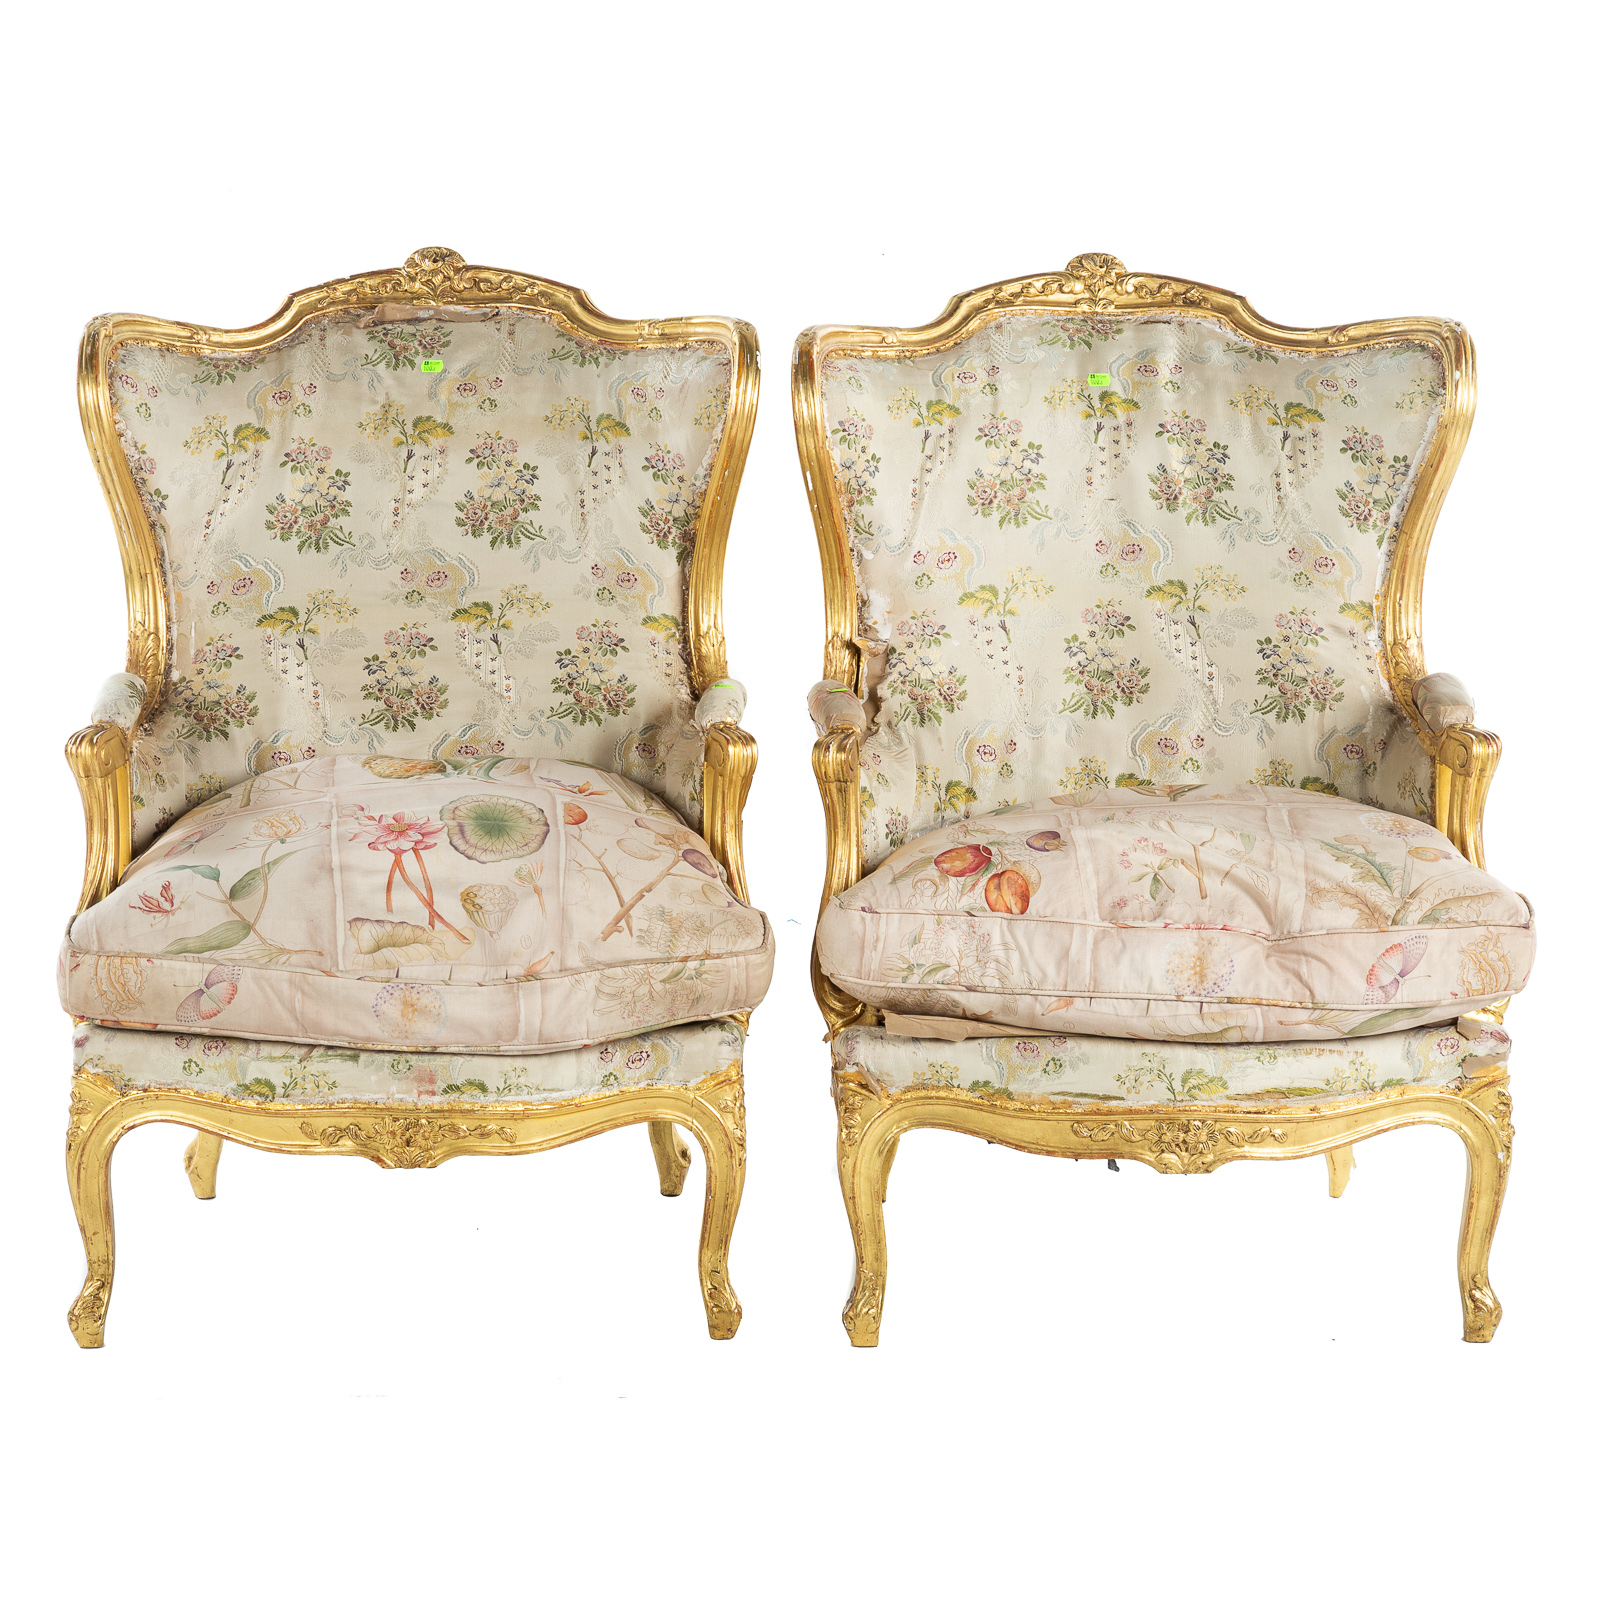 A PAIR OF LOUIS XV STYLE GILTWOOD 36a893